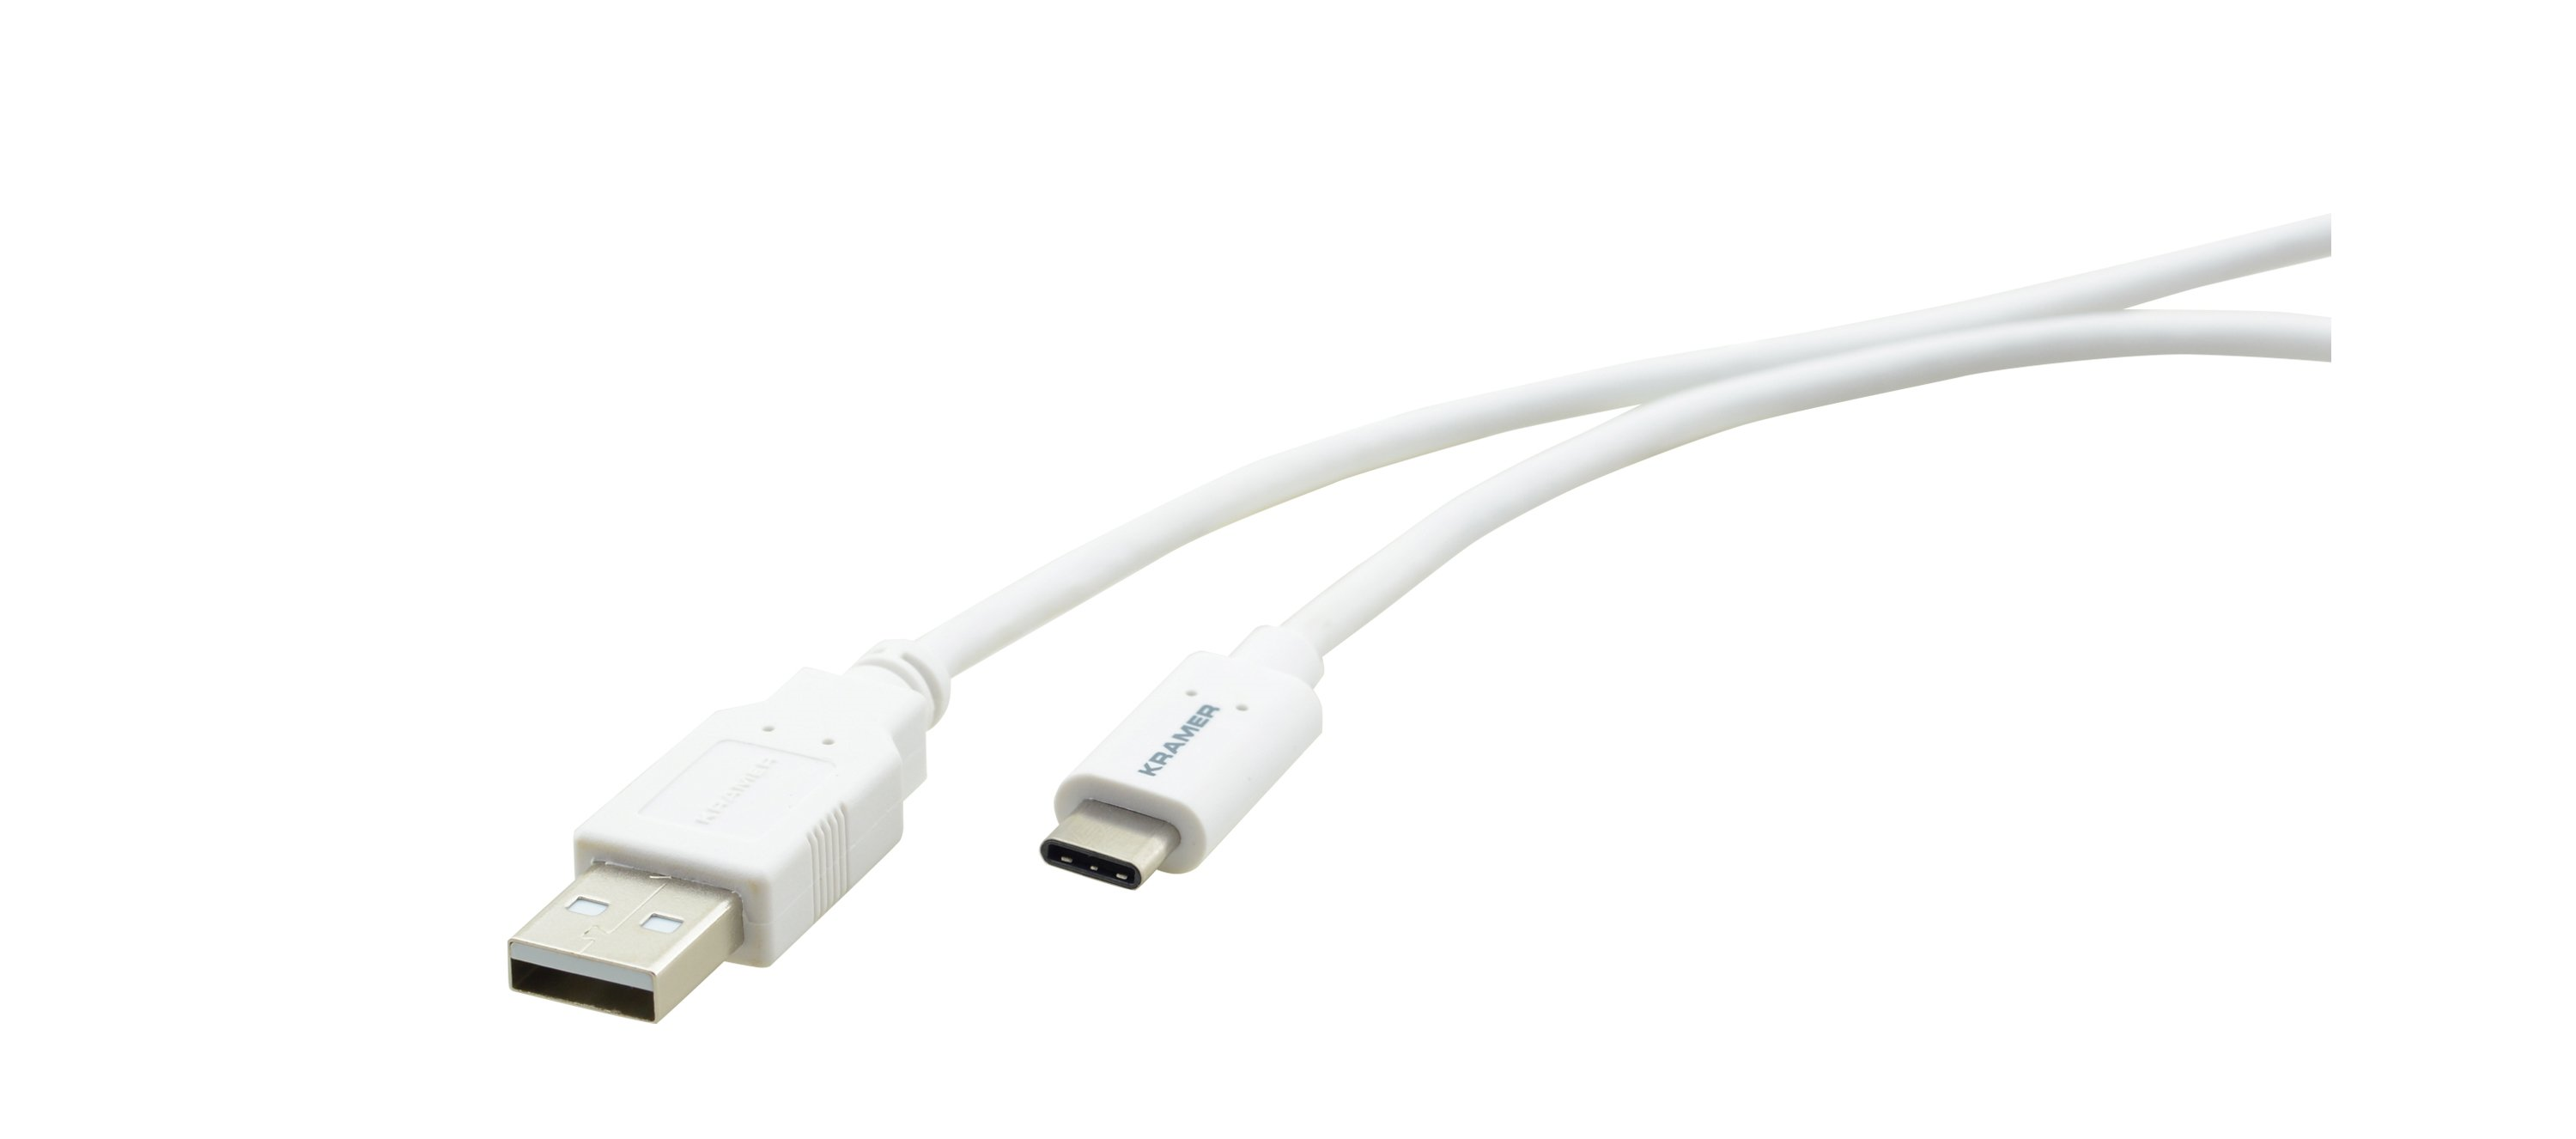 C-USB/CA-6 USB 2.0 C(M) to A(M) Cable-6ft